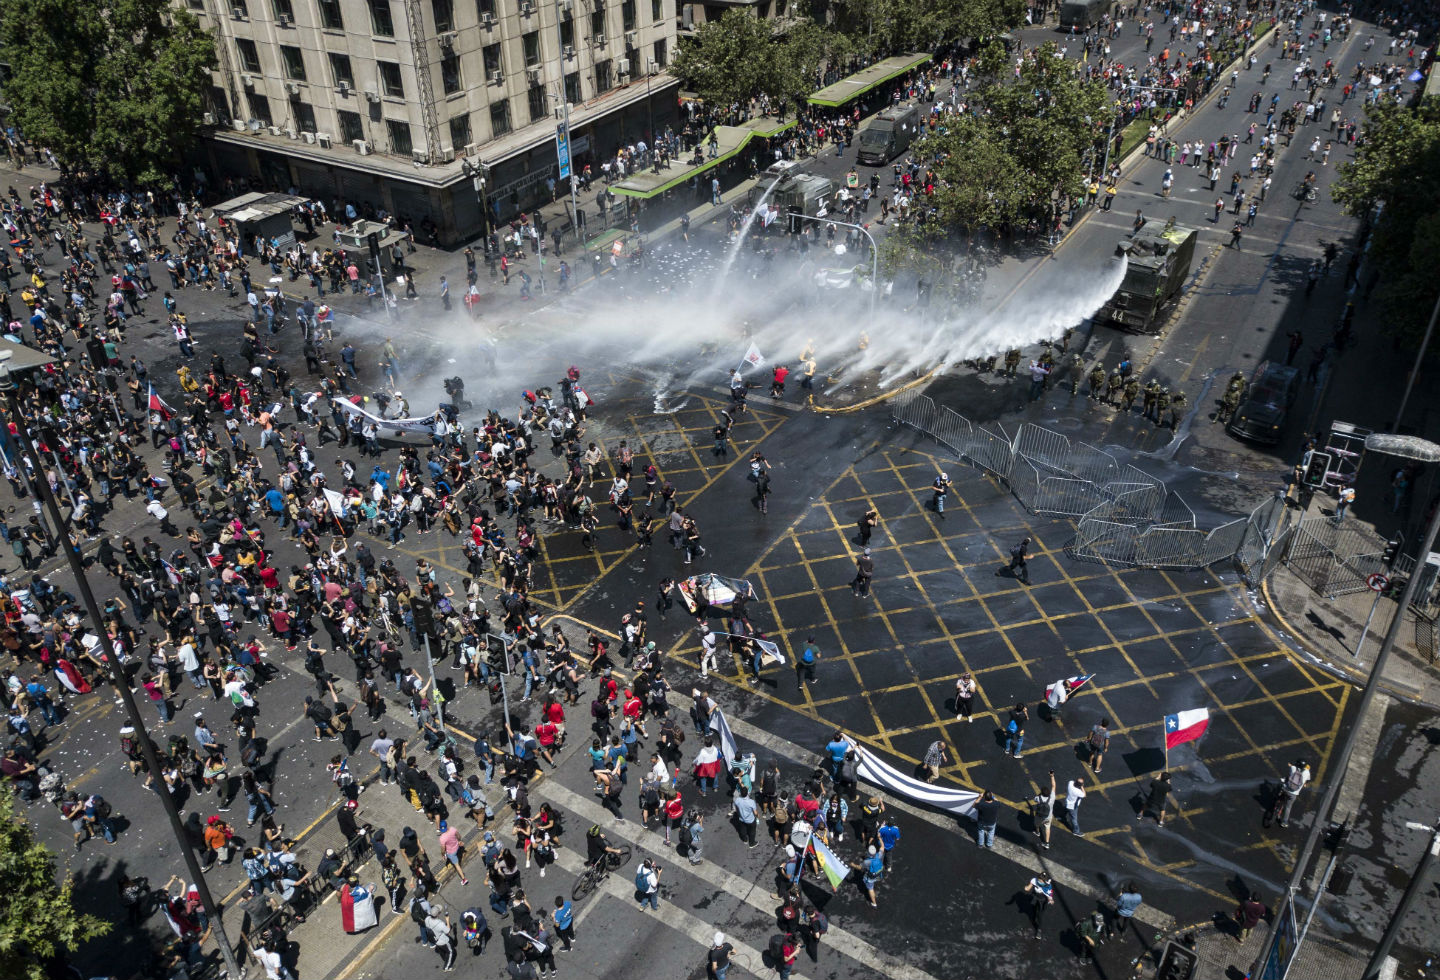 Riots in Chile on anniversary of Pinochet's coup